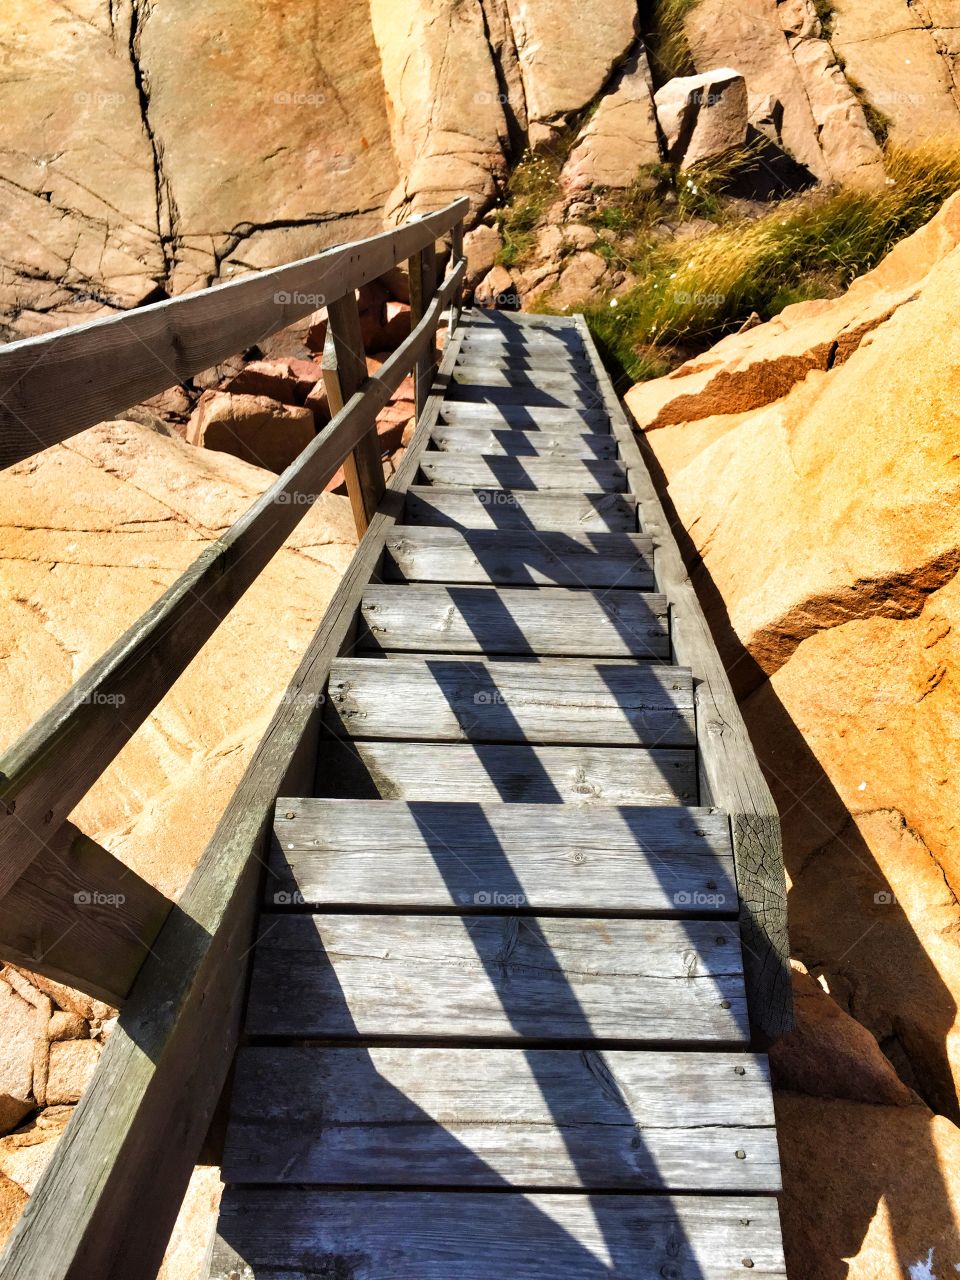 Stairway to heaven. Stairs in the famous rocks of Bohuslän in Sweden